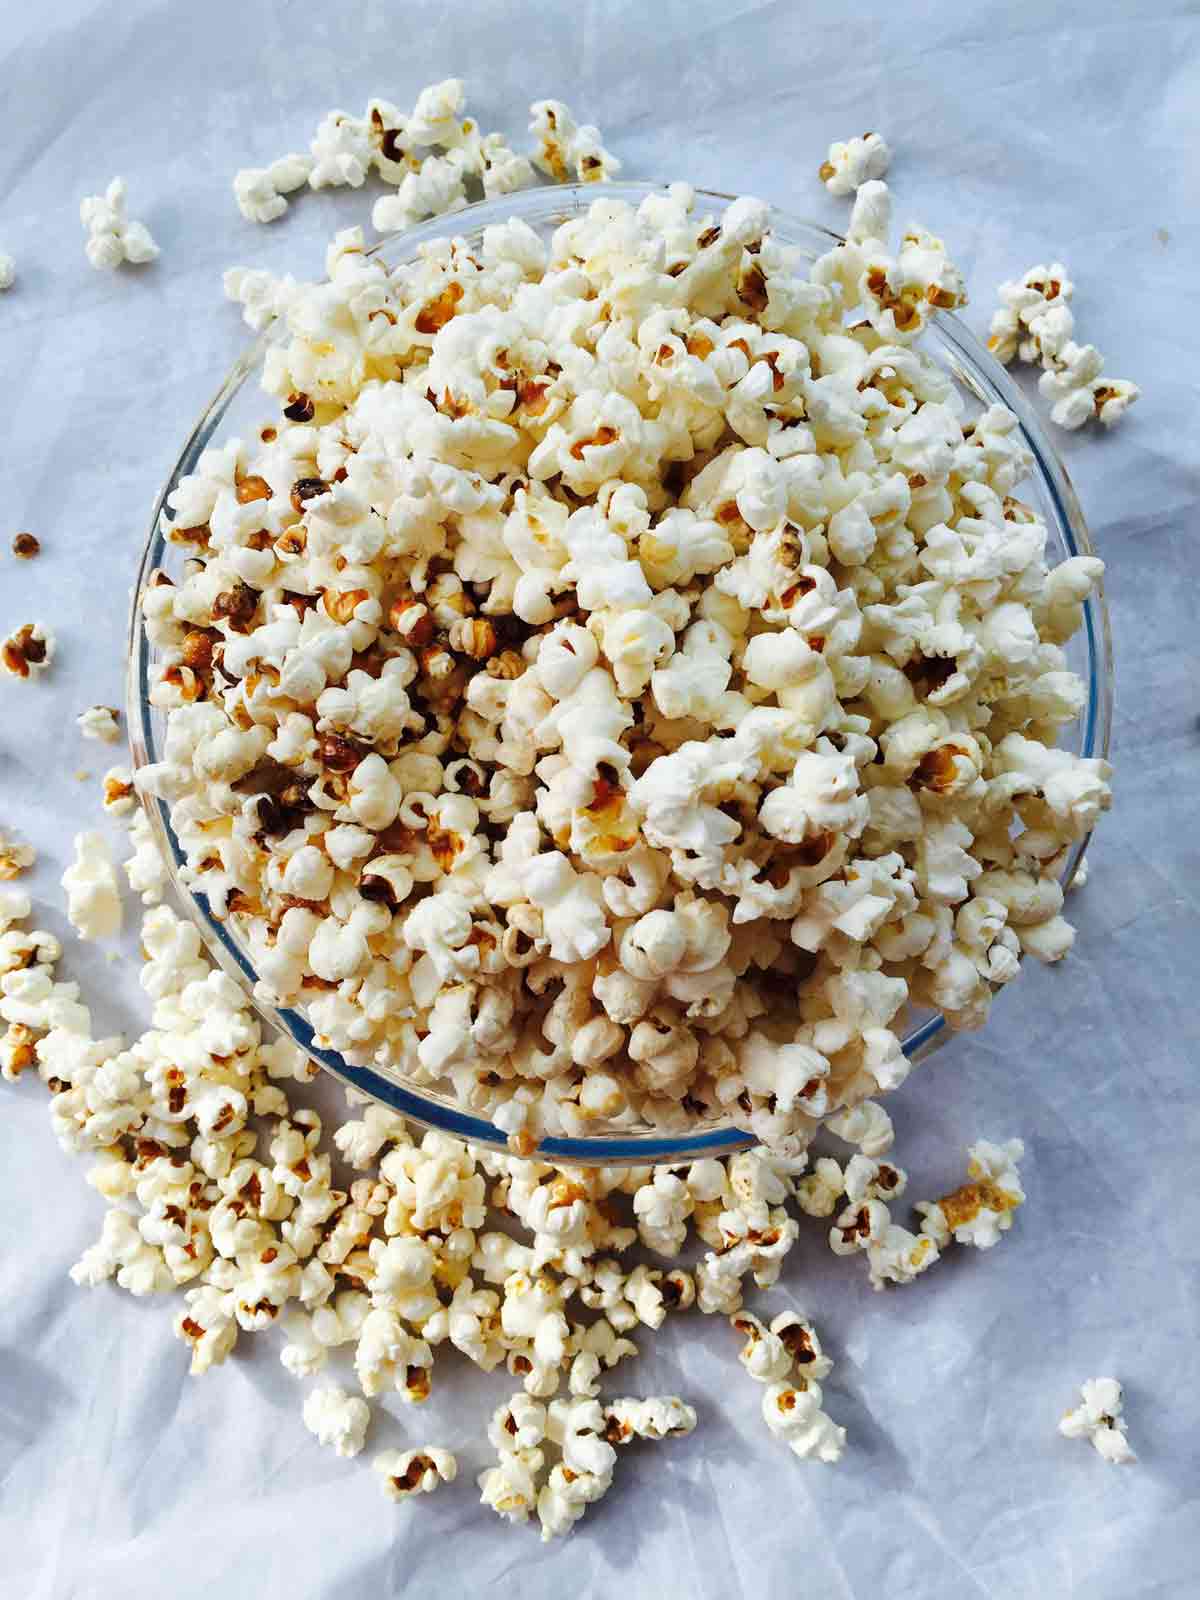 Learn to prepare this delicious homemade popcorn treat, or spice it up further with you preferred herbs and condiments